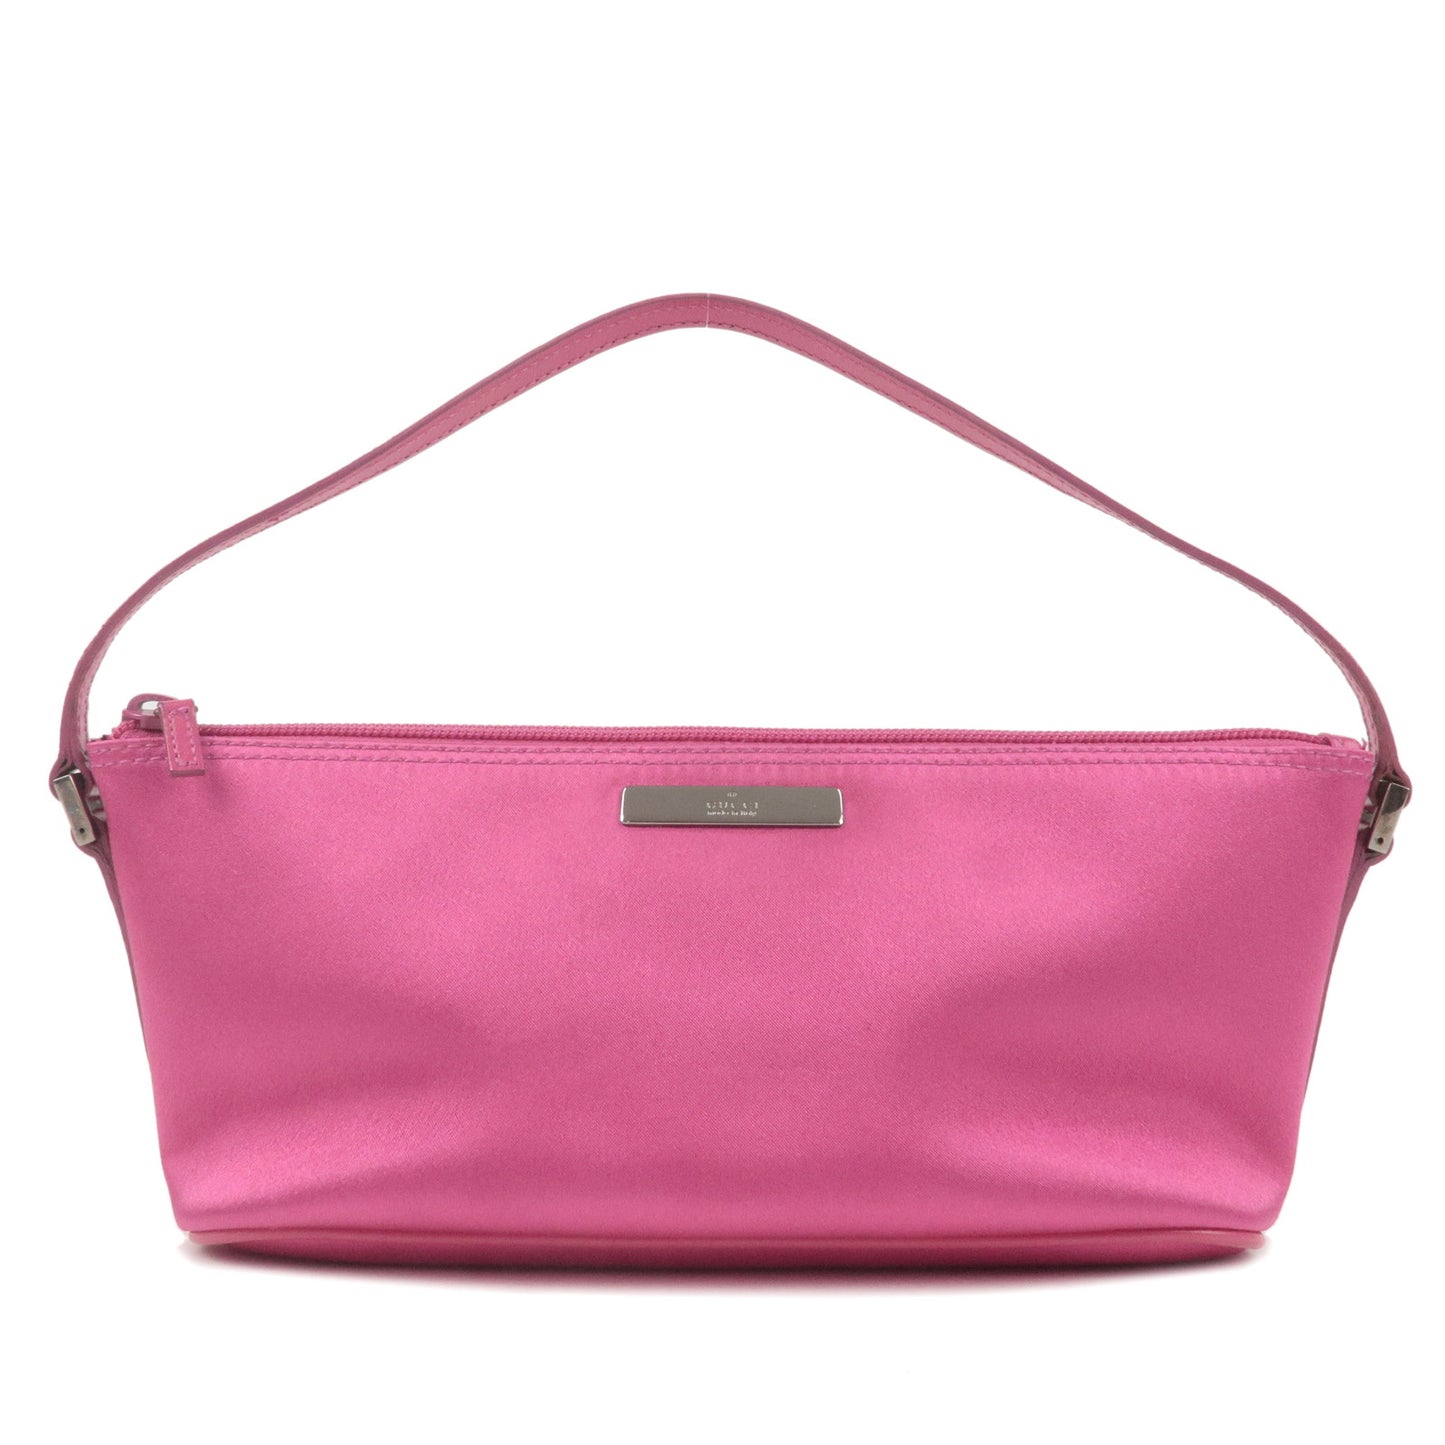 GUCCI Boat Bag Satin Leather Pouch Hand Bag Pink 039.1103